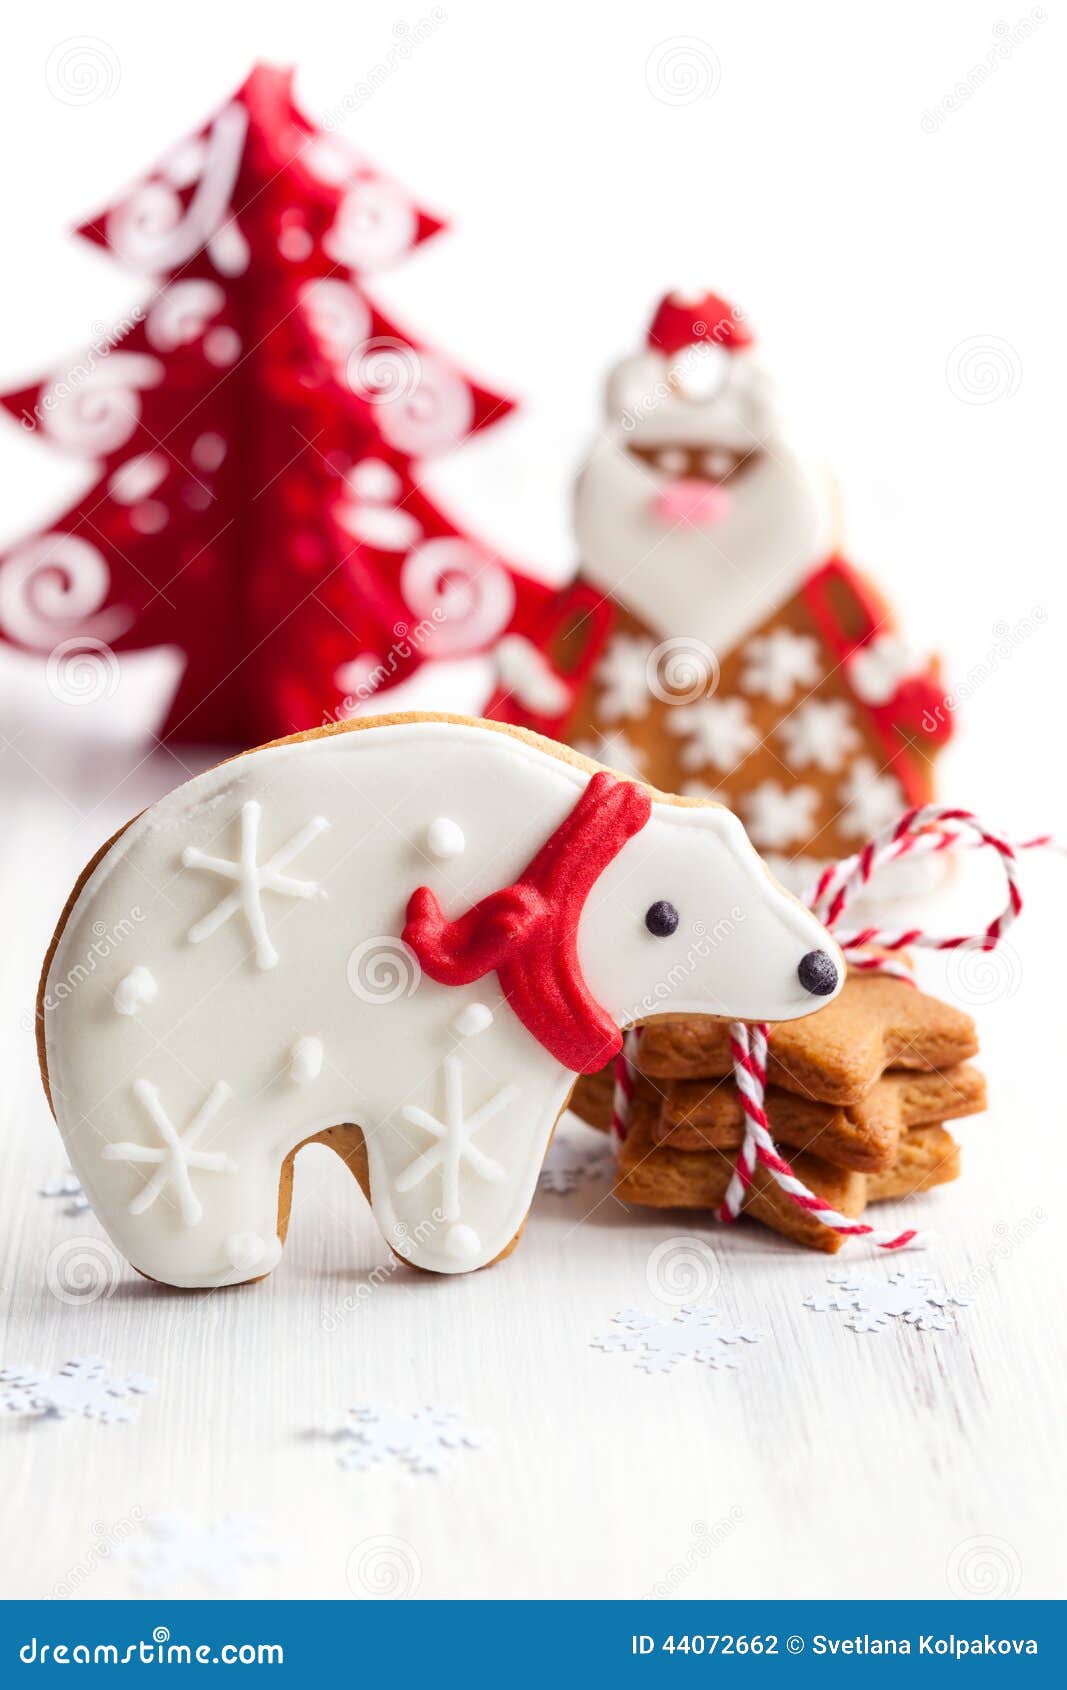 Gingerbread cookies stock photo. Image of cake, advent - 44072662